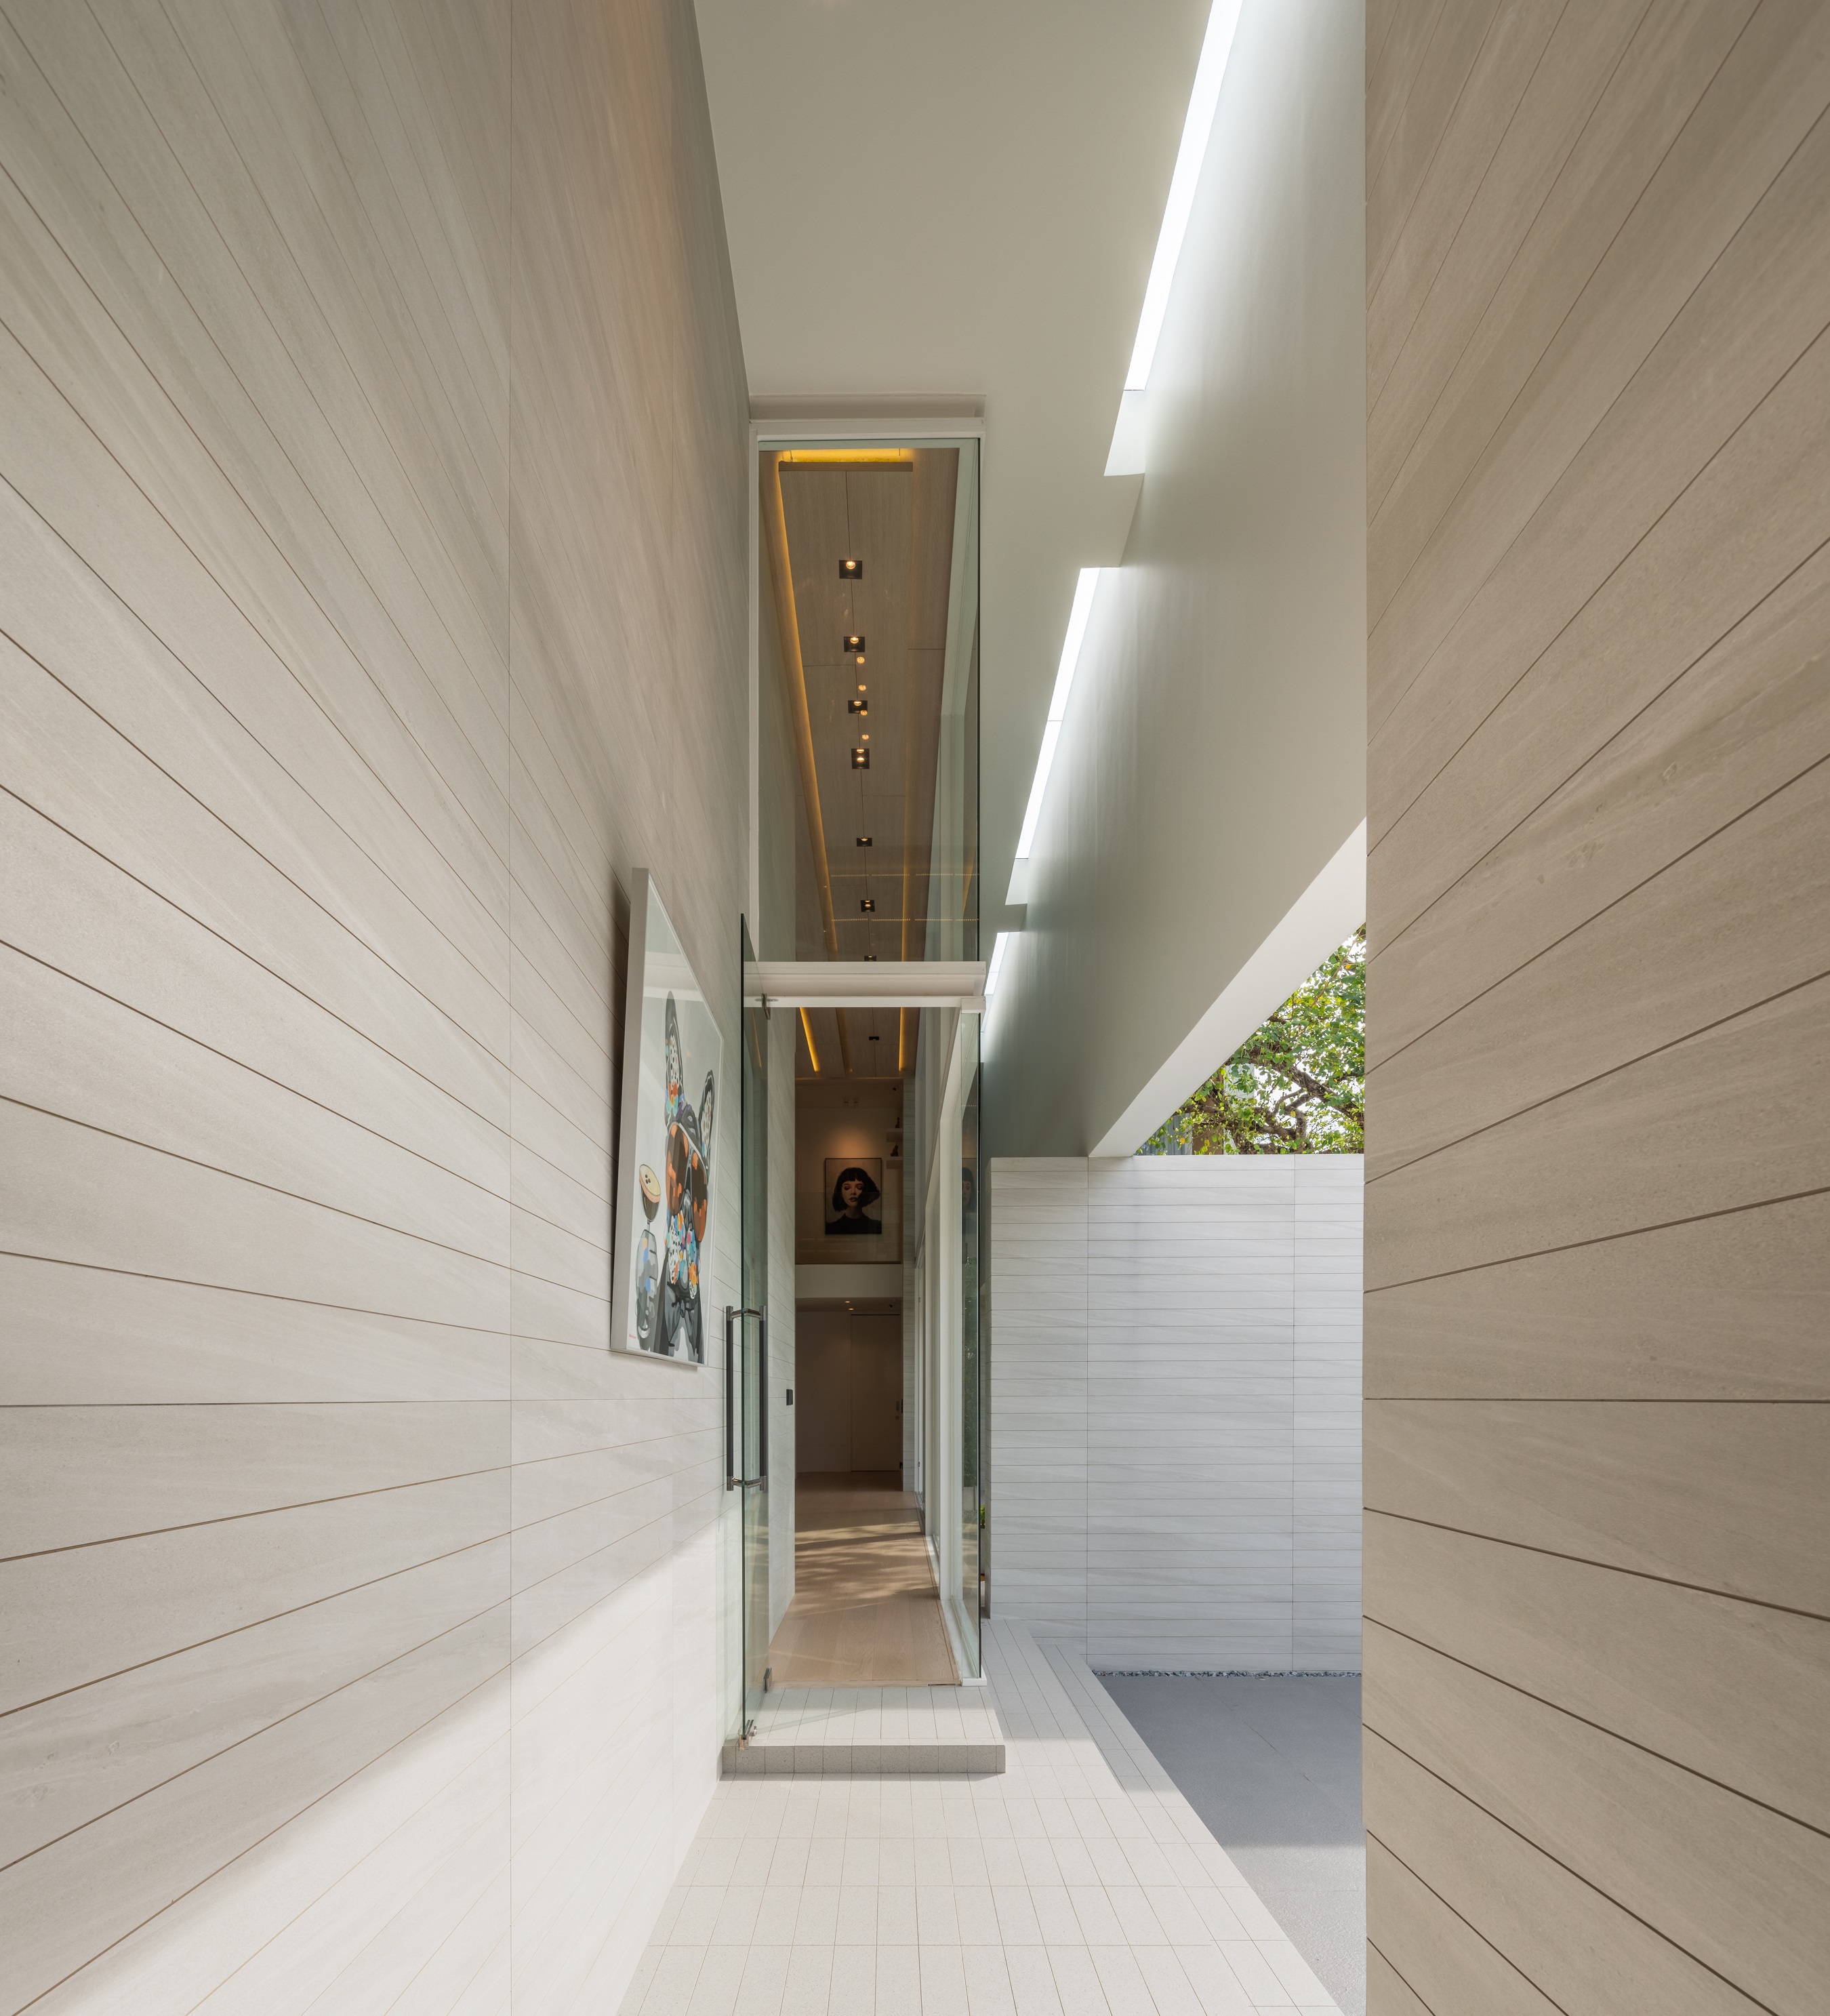 Main entrance area of TJ House, Photo by SkyGround architectural film & photography